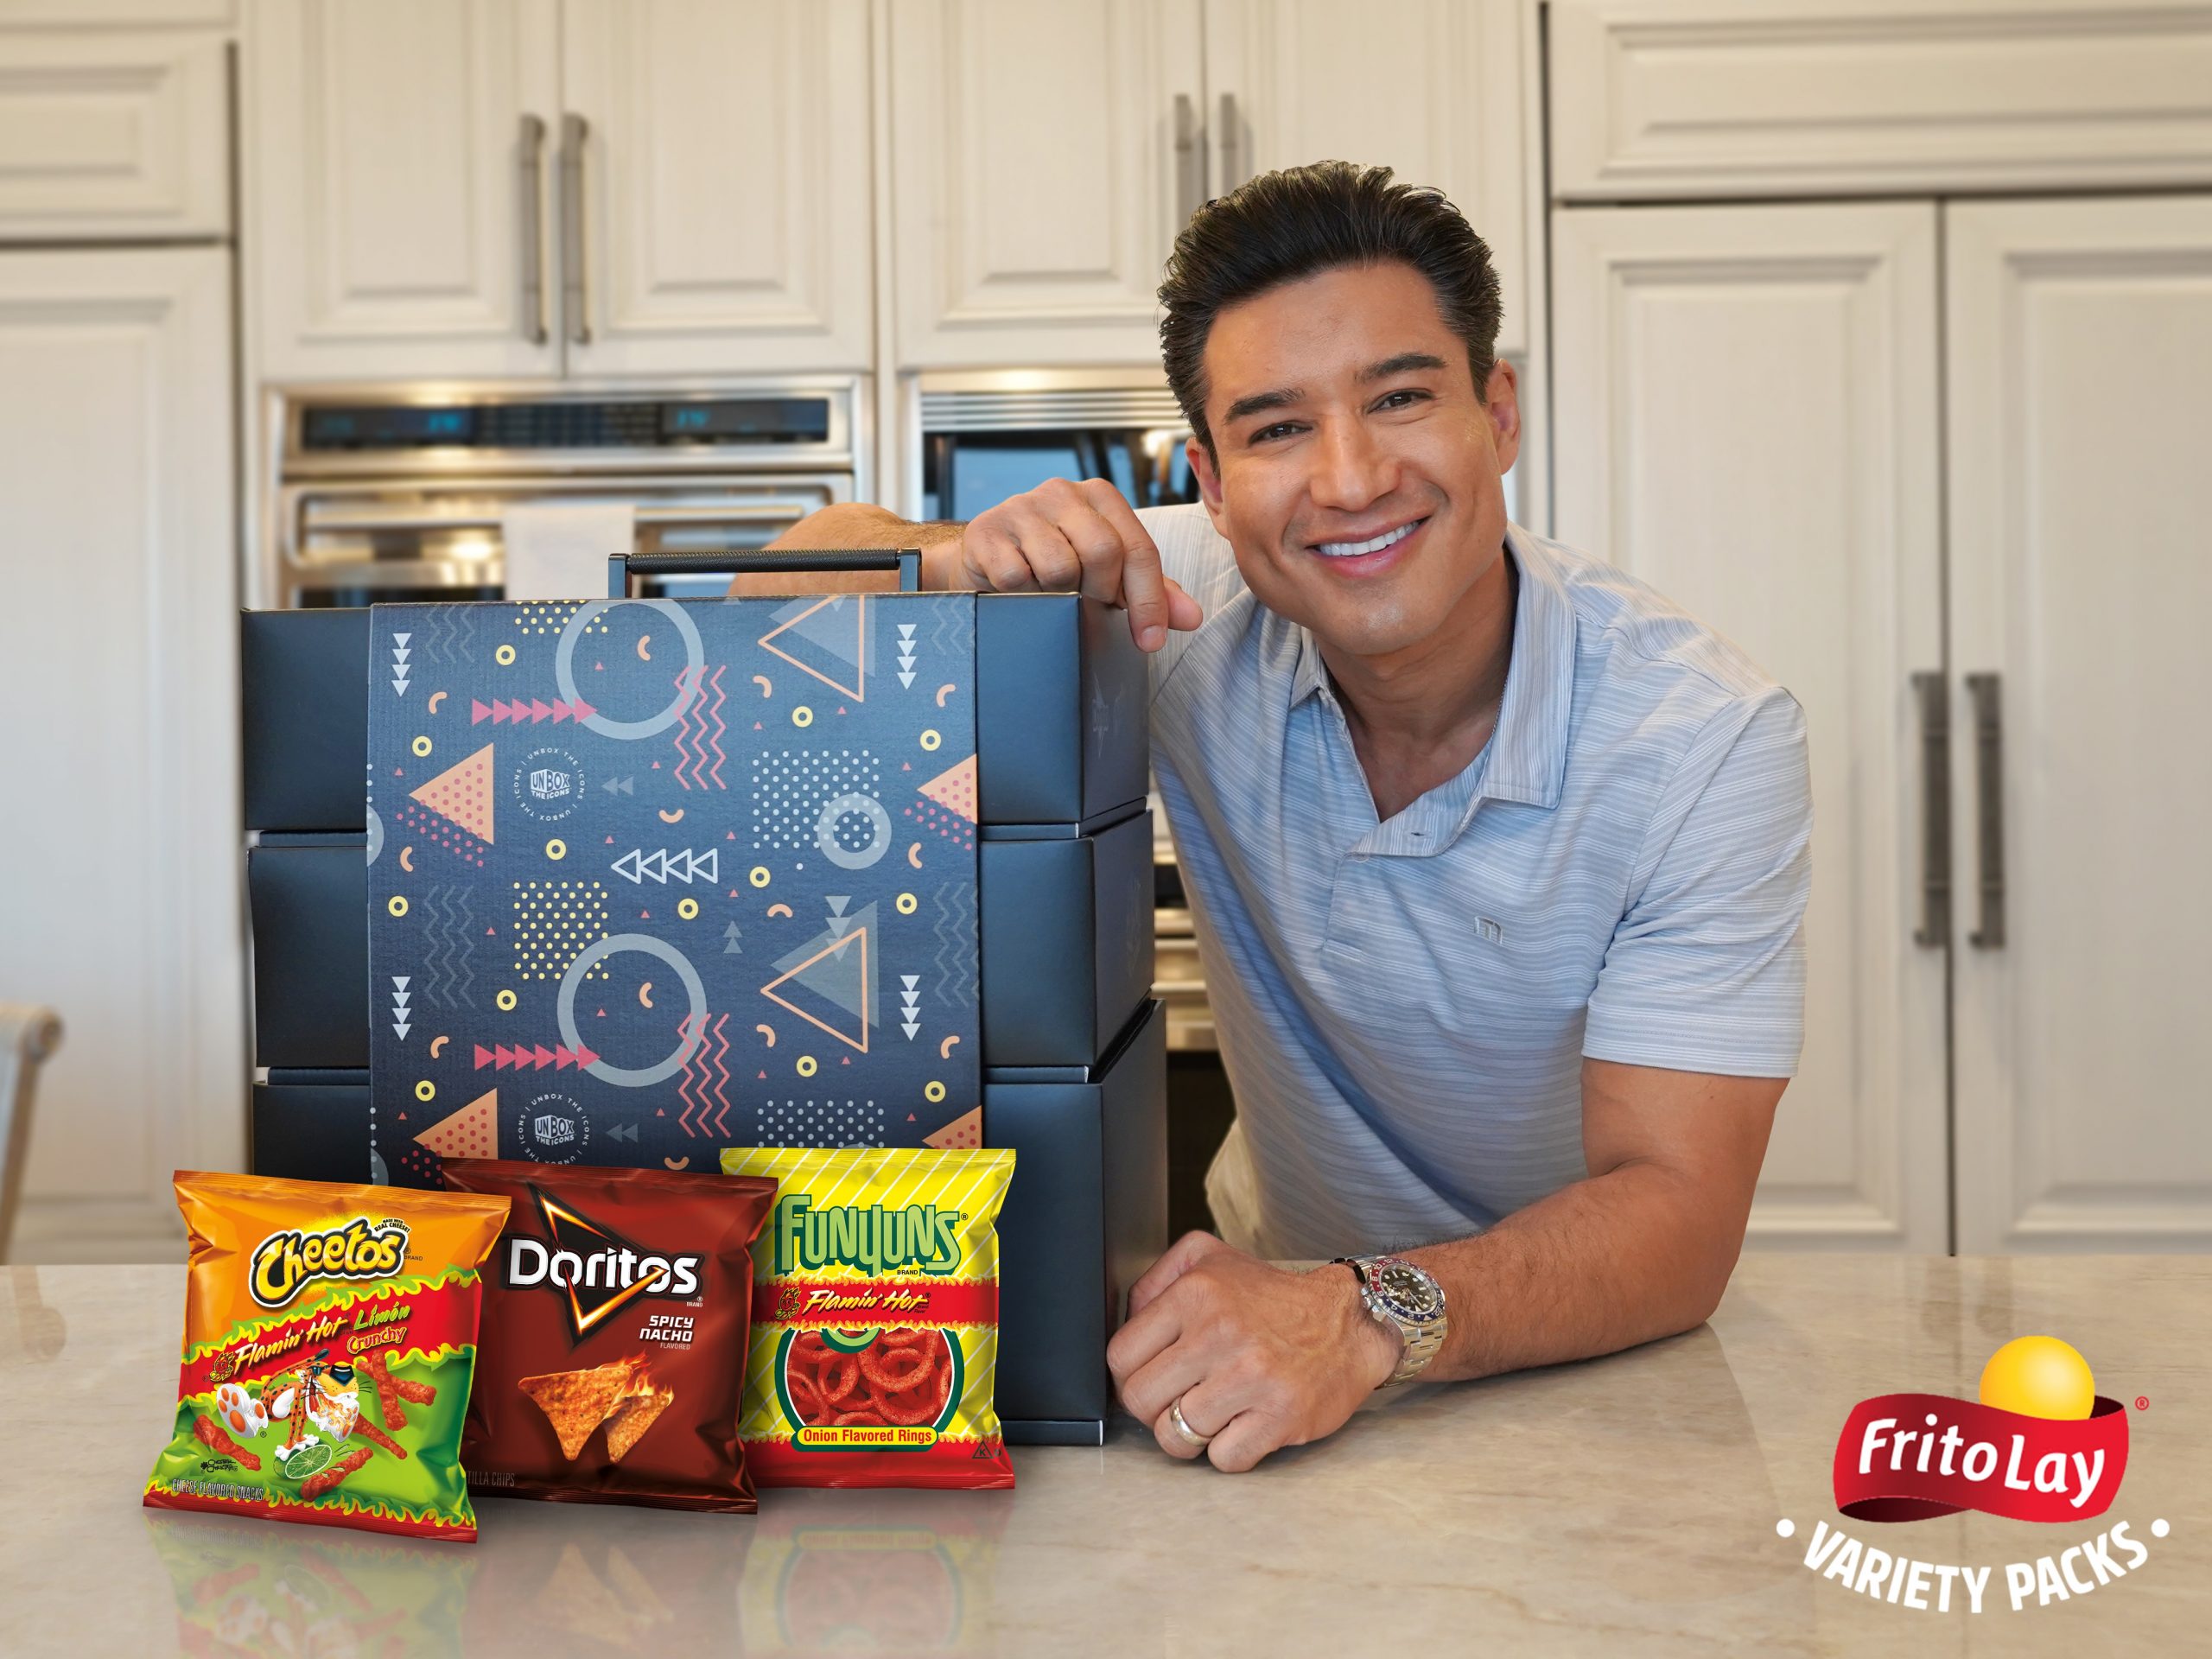 Mario Lopez Reveals His Frito-Lay Favorites, But His Kids Don’t Like Them (Yet) [Exclusive]